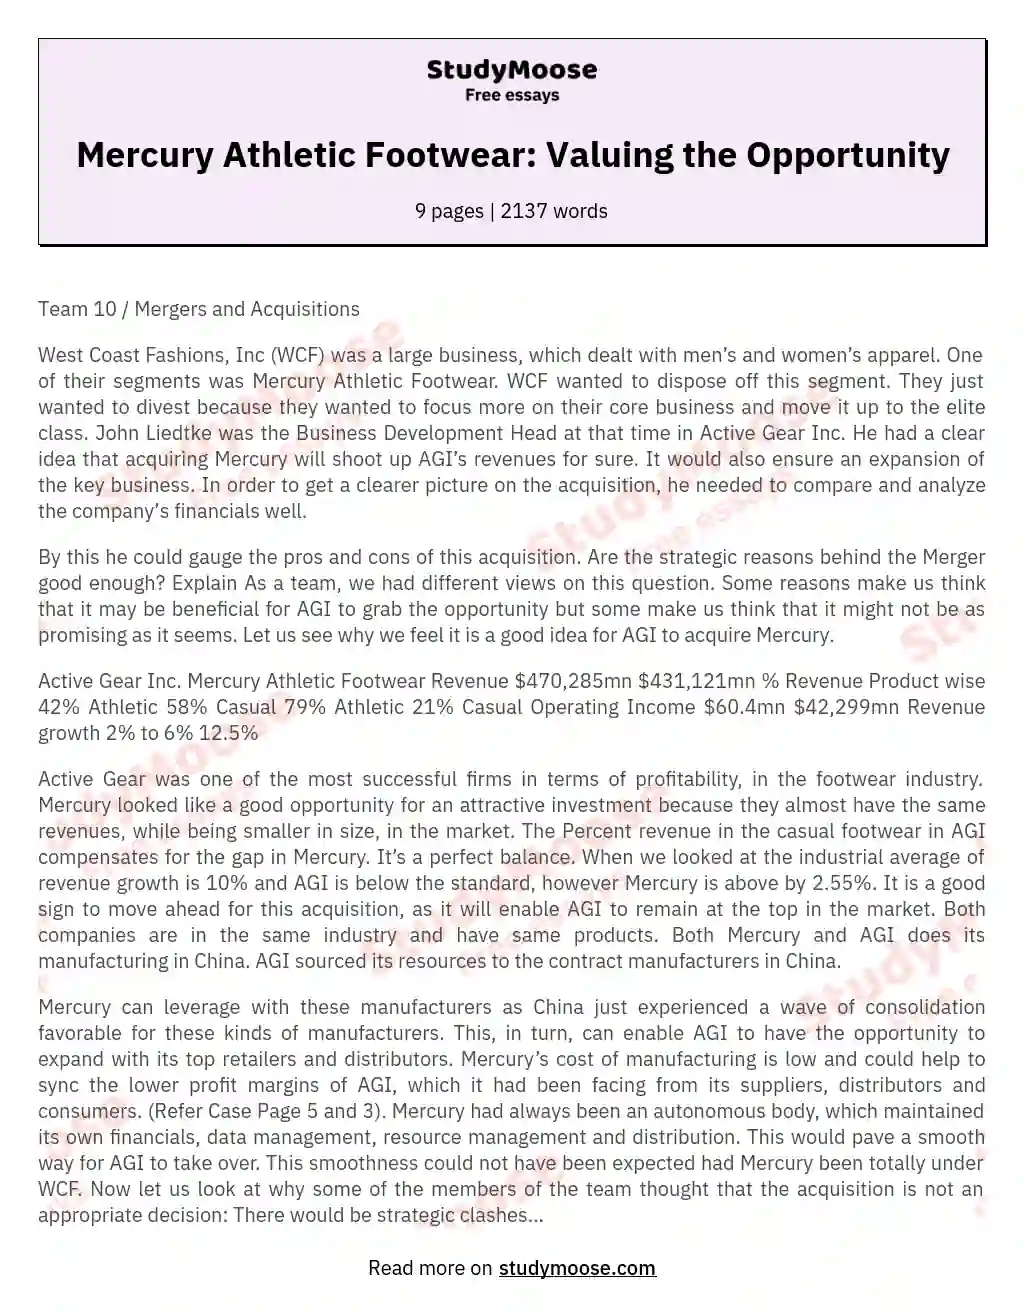 Mercury Athletic Footwear: Valuing the Opportunity